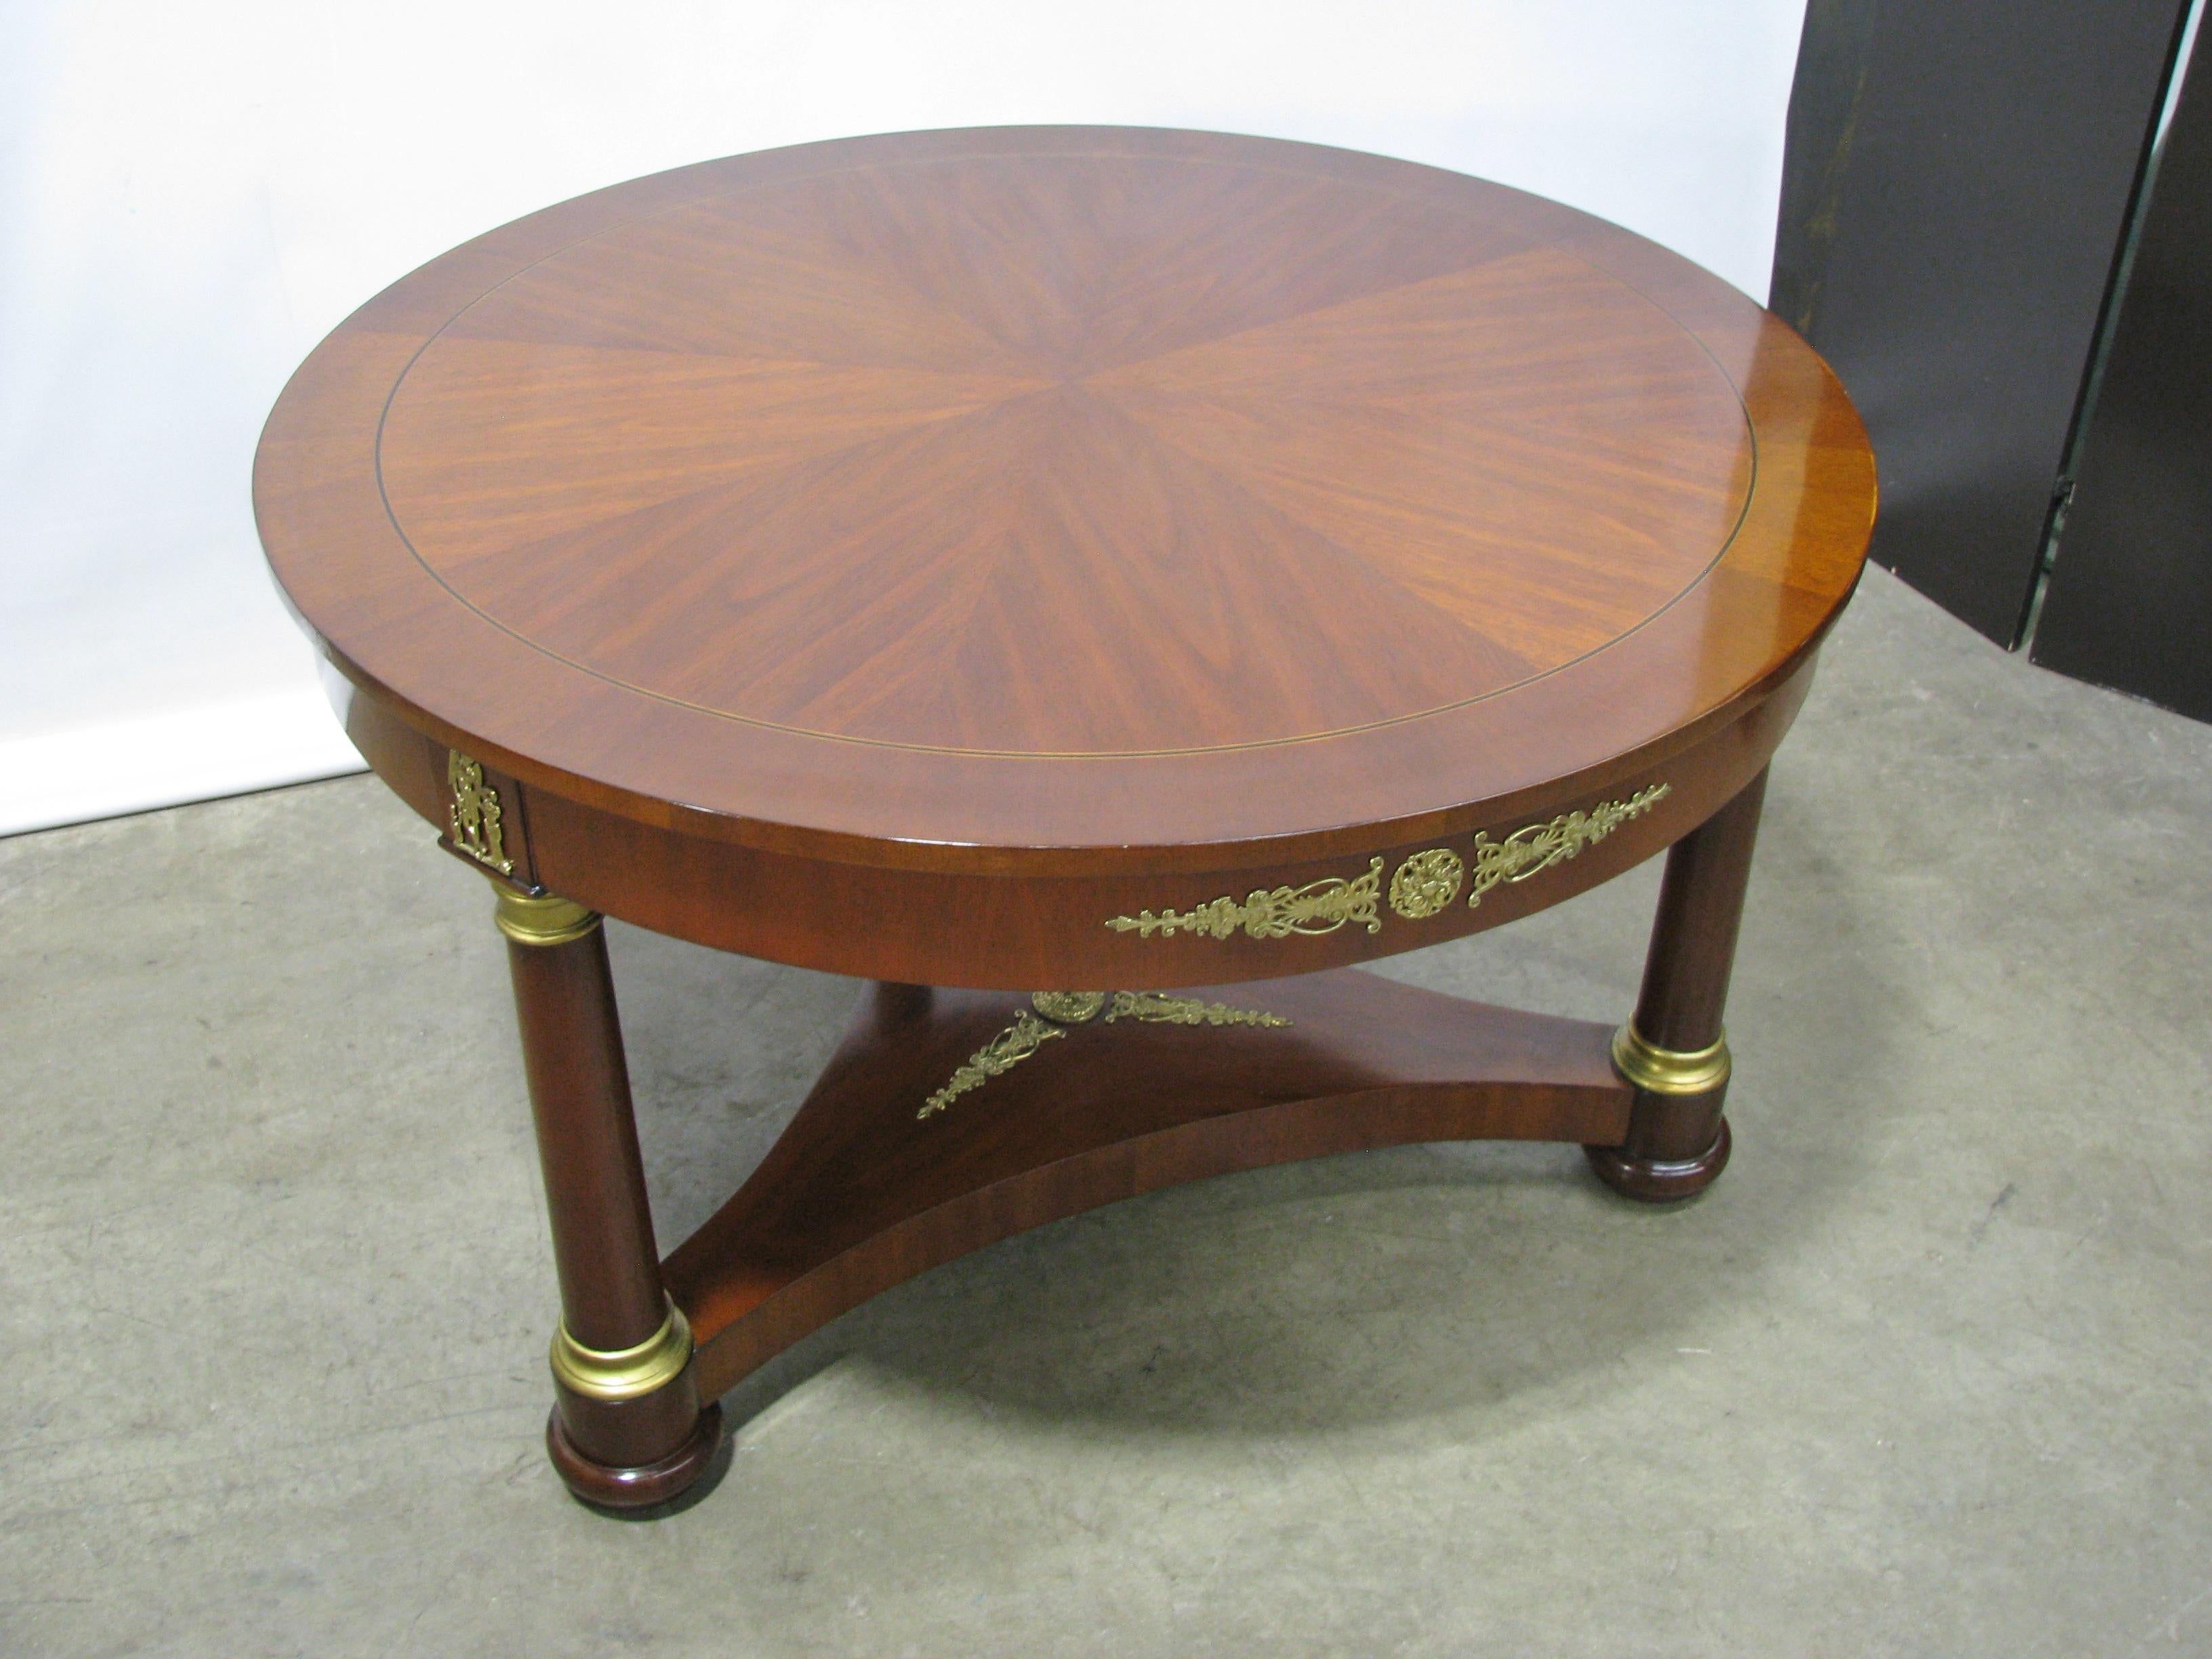 Gueridon style center table in the French Empire taste with wedge-shaped veneers. Mahogany solids and veneers, with cast brass neoclassic-style mounts. The capitals and bases on the three columns are gilded wood. Beautifully patterned veneers on the